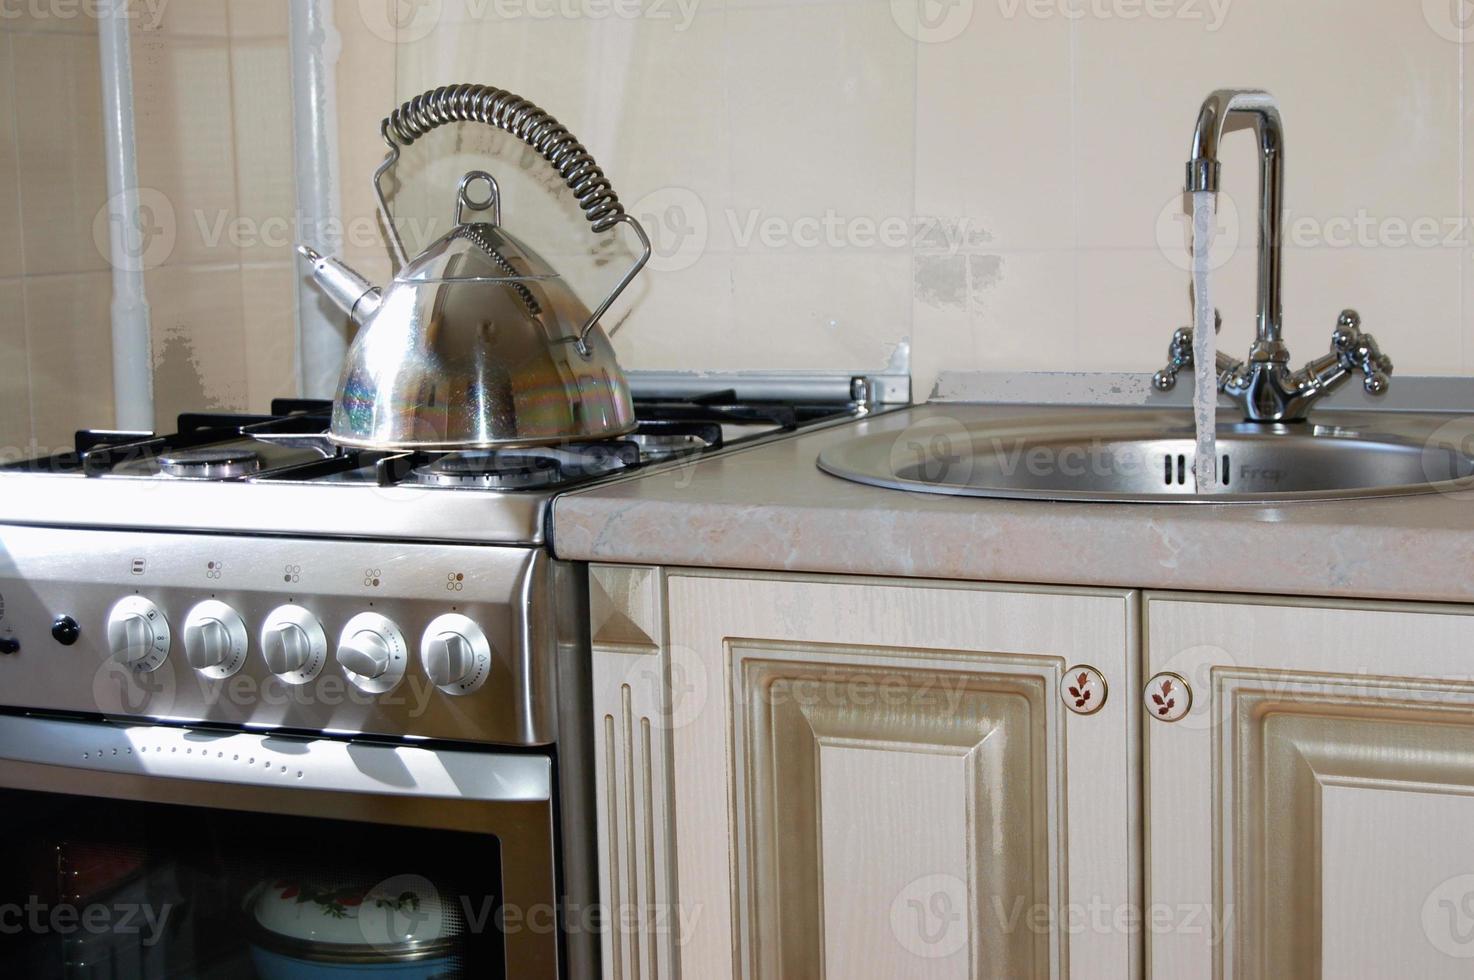 Gas Stove Wash Kitchen Equipment 1460563 Stock Photo At Vecteezy